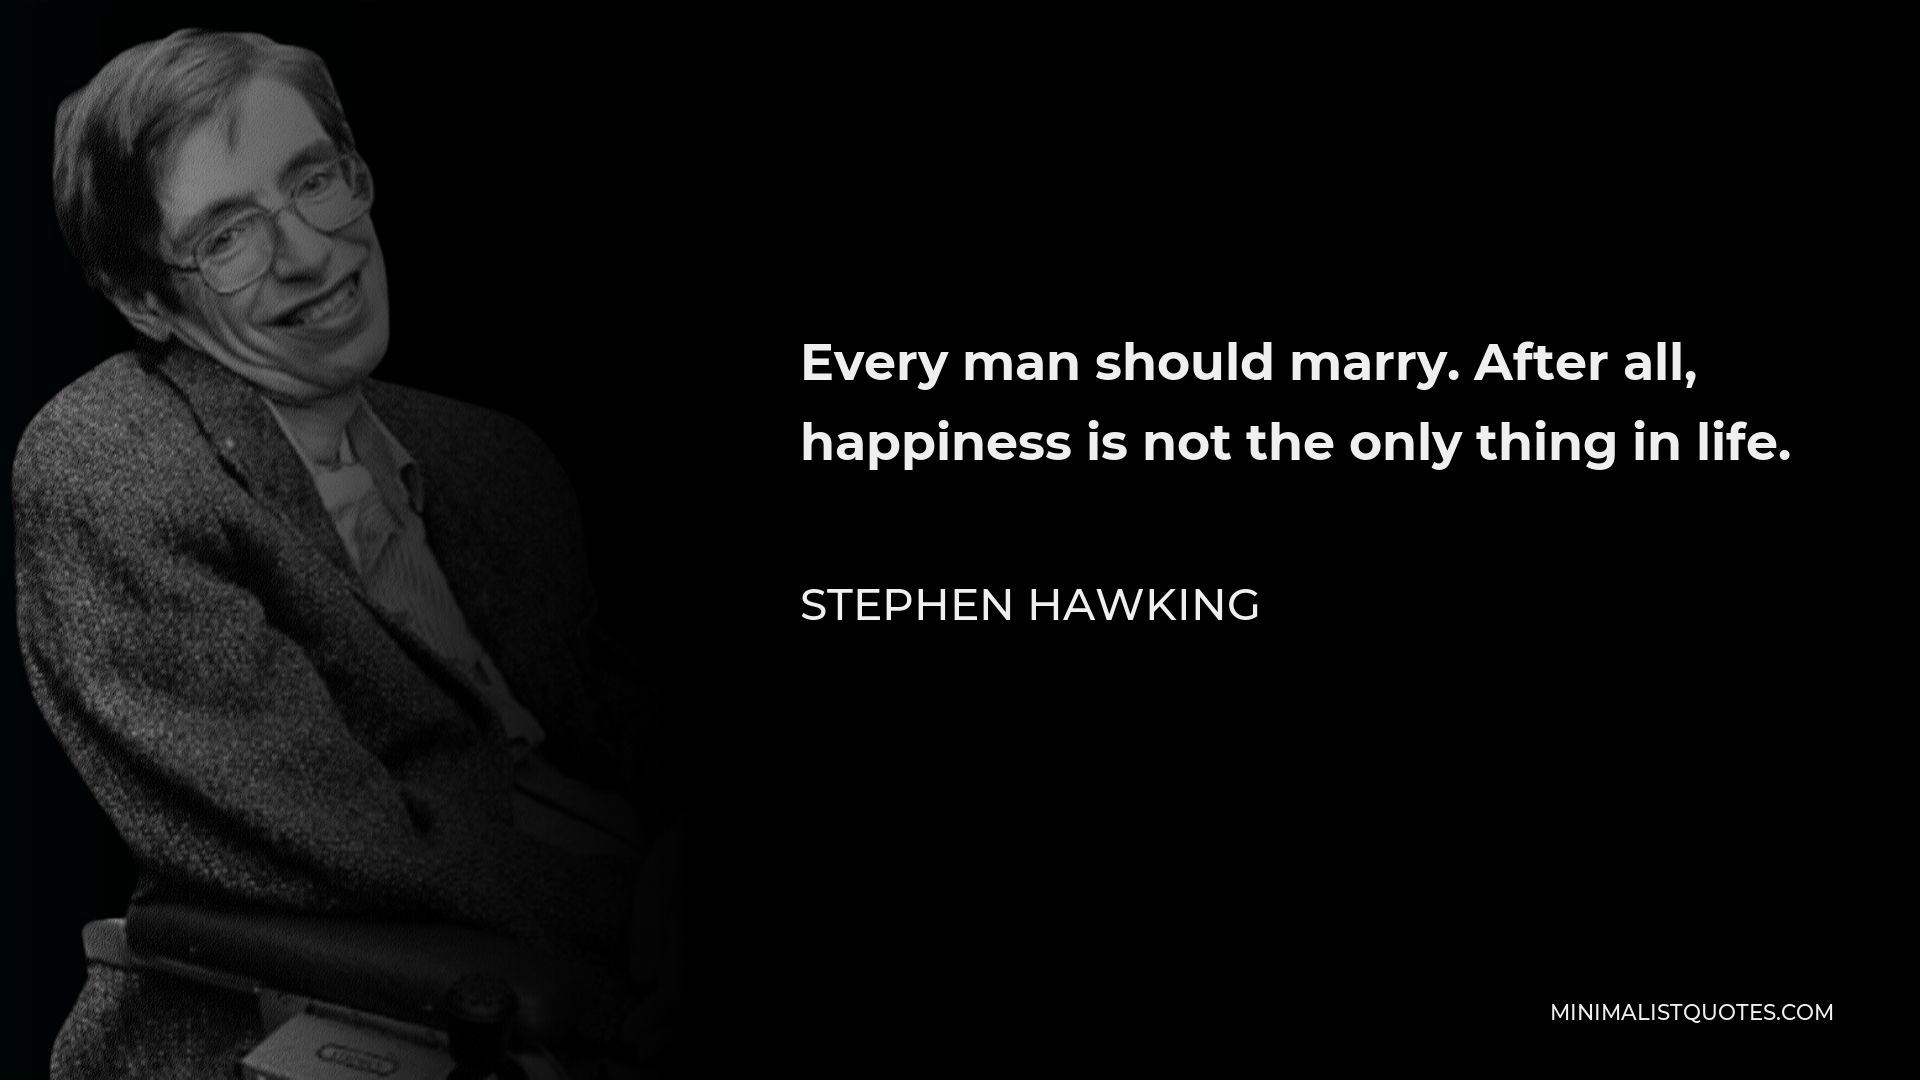 Stephen Hawking Quote - Every man should marry. After all, happiness is not the only thing in life.